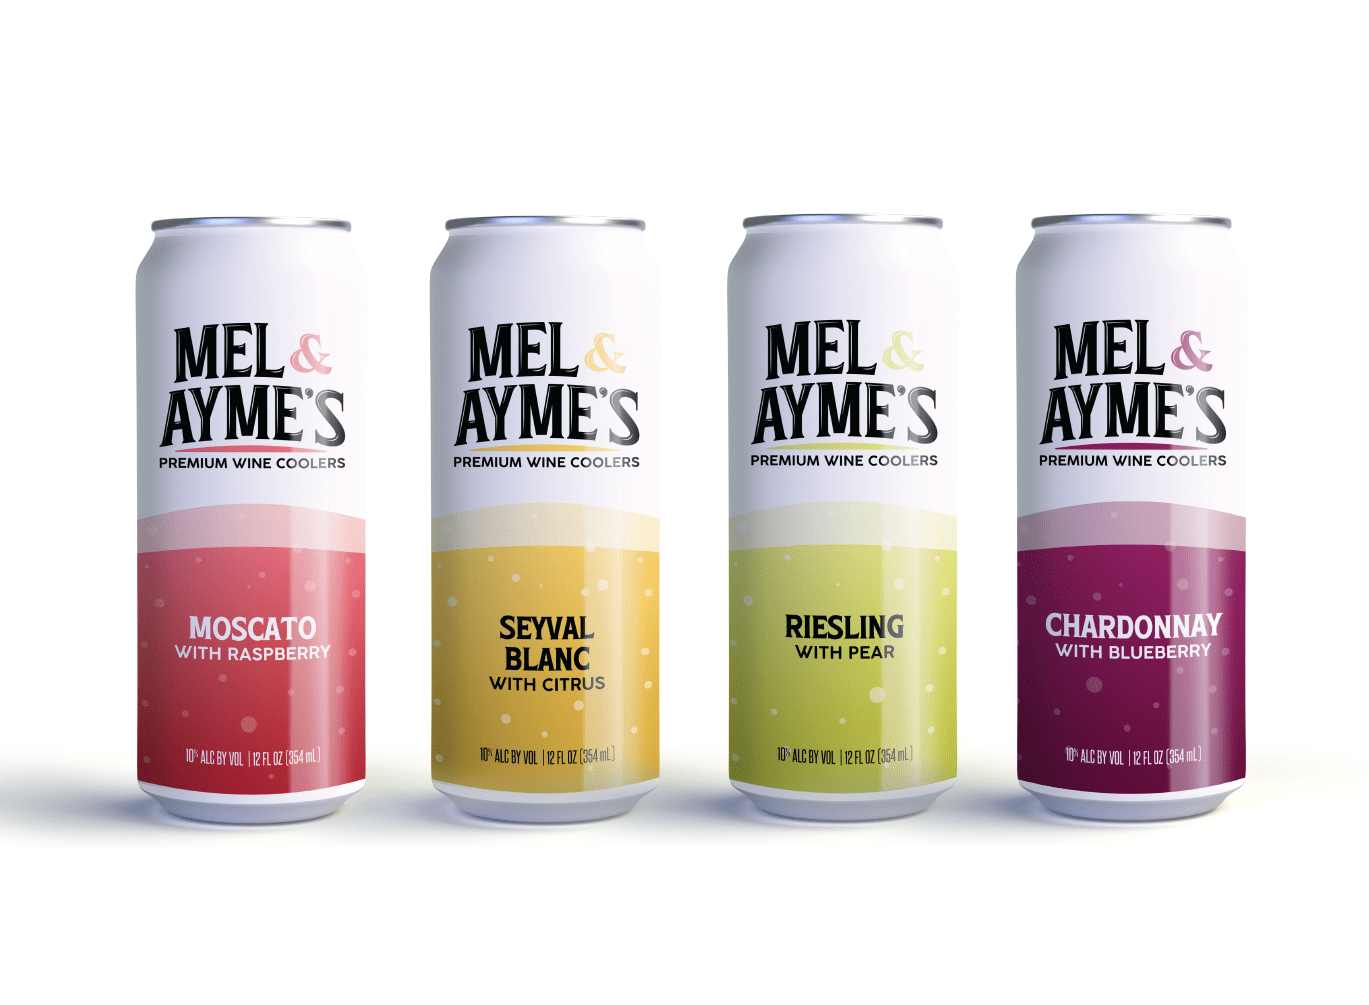 LaBelle Winery Introduces Mel & Ayme’s Premium Wine Coolers